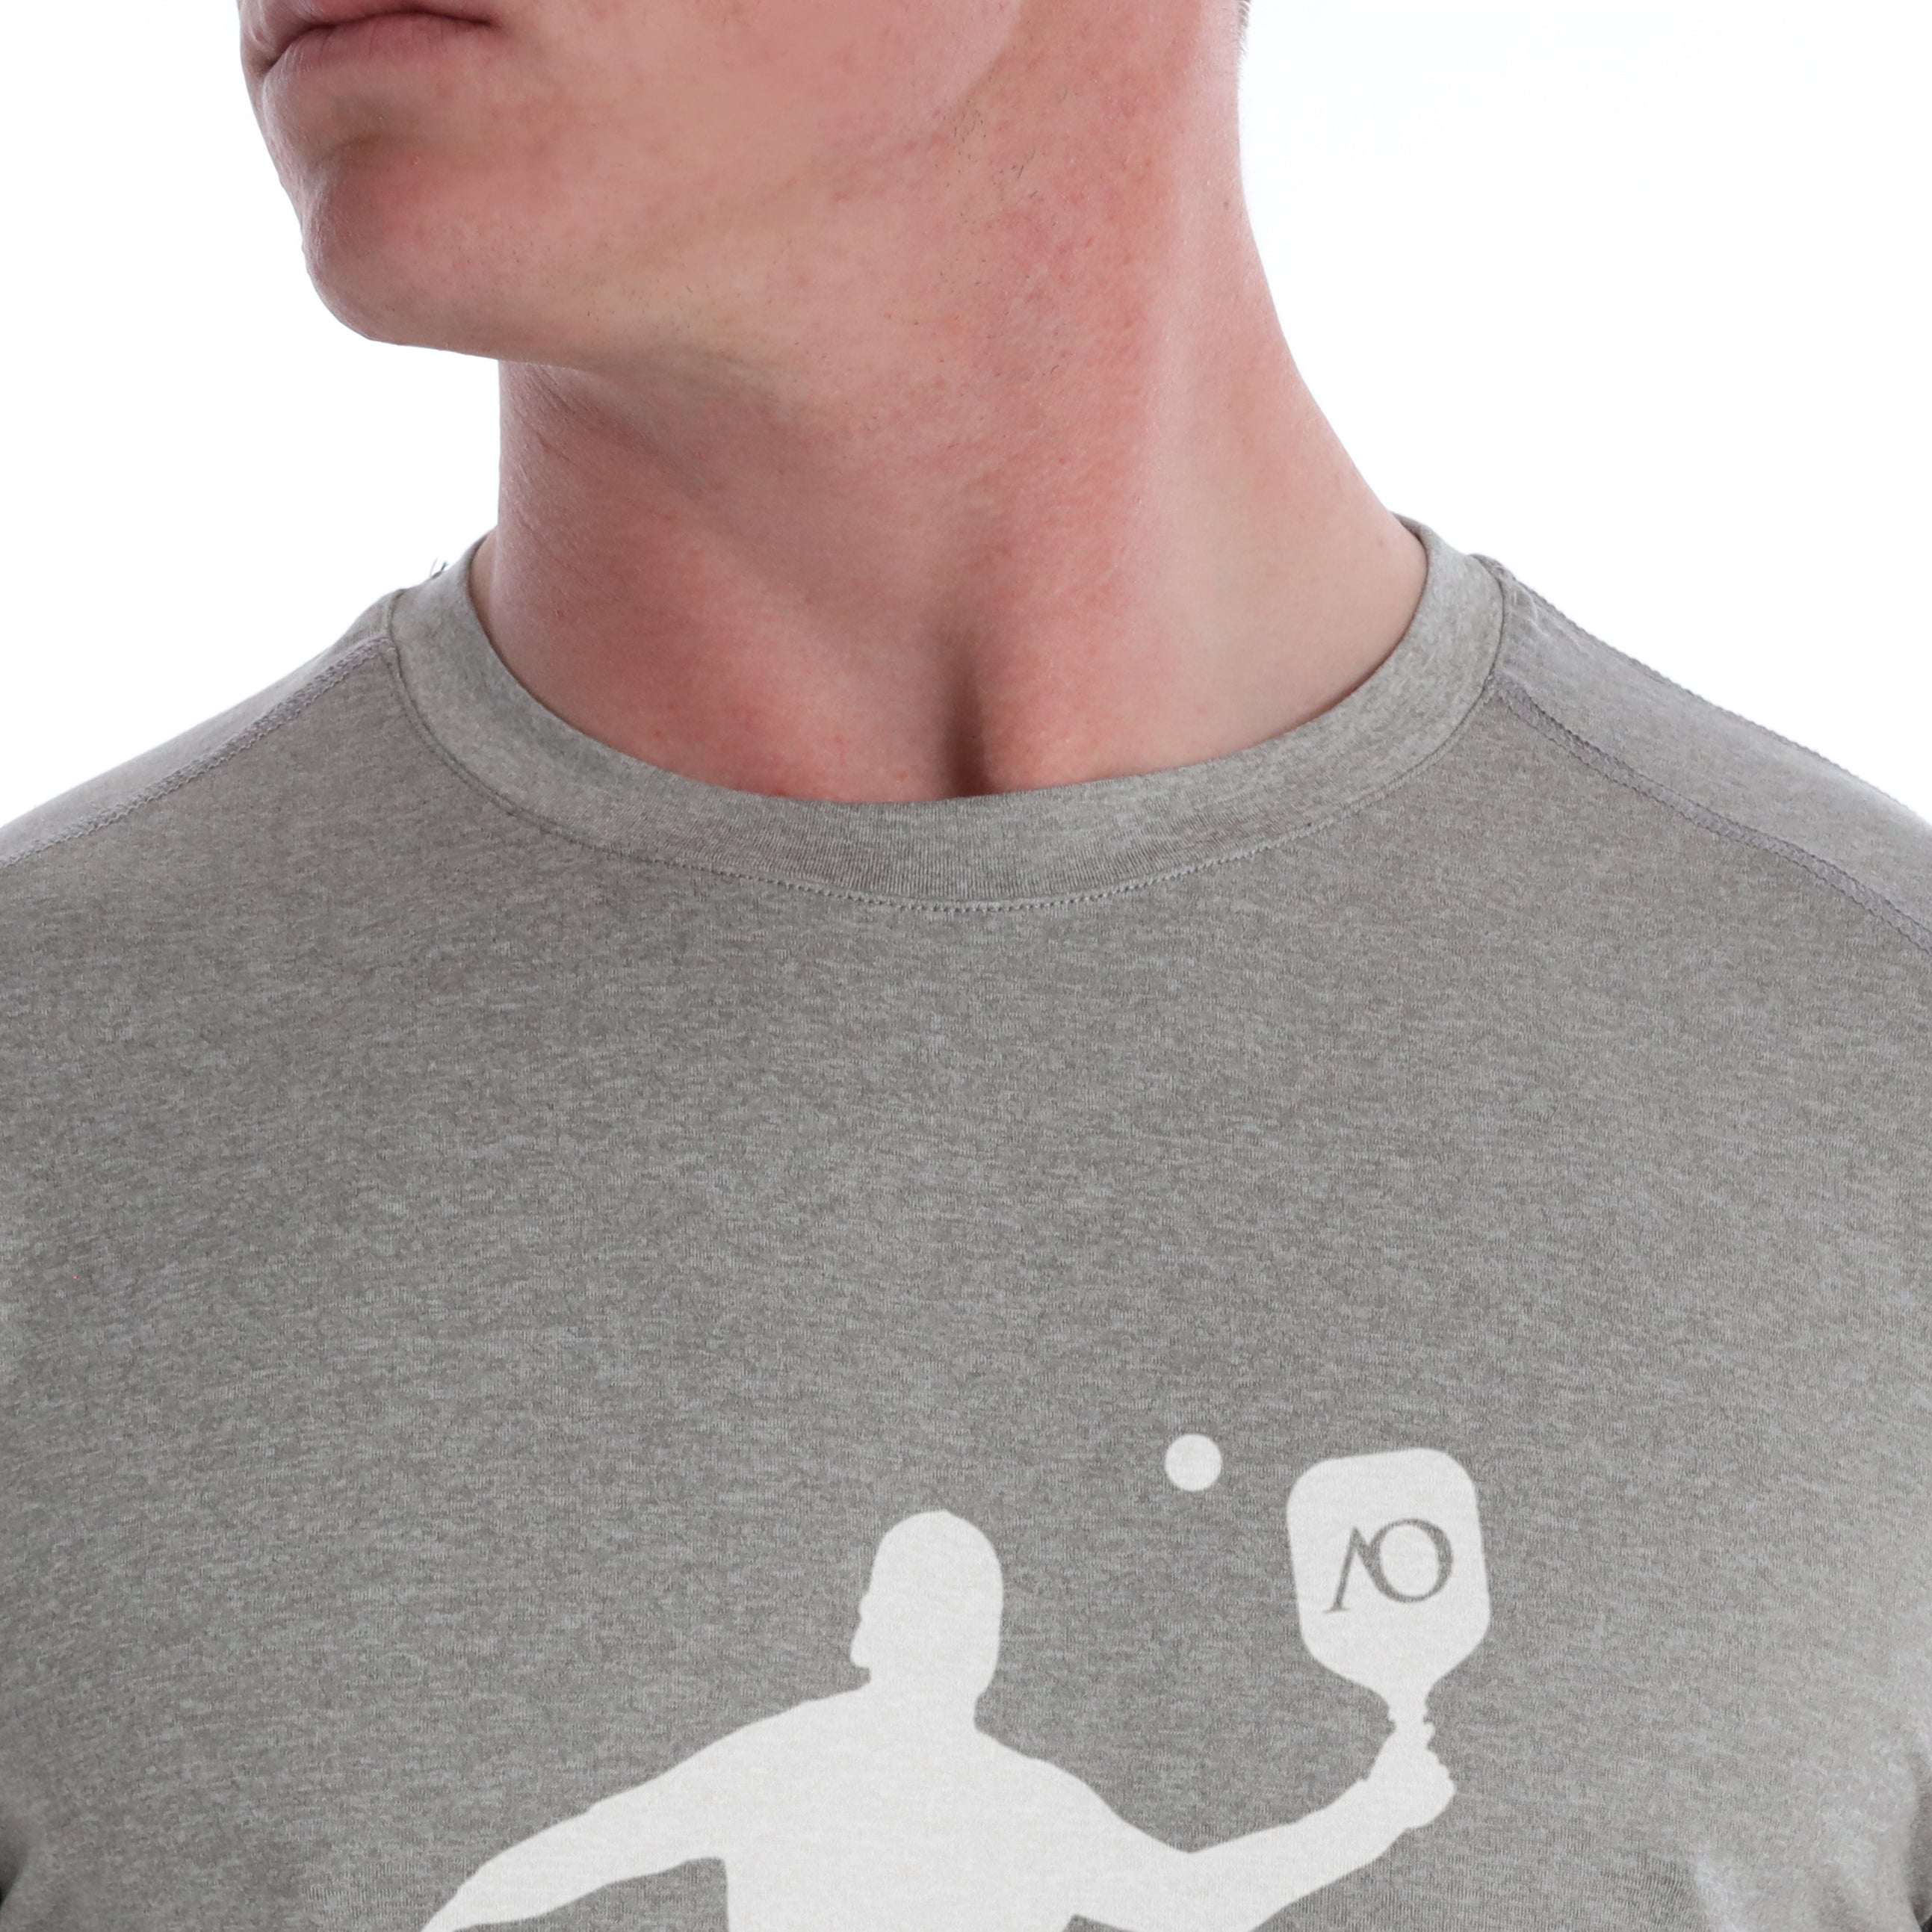 BUTTER T PICKLEBALL SILHOUETTE - GREY HEATHER